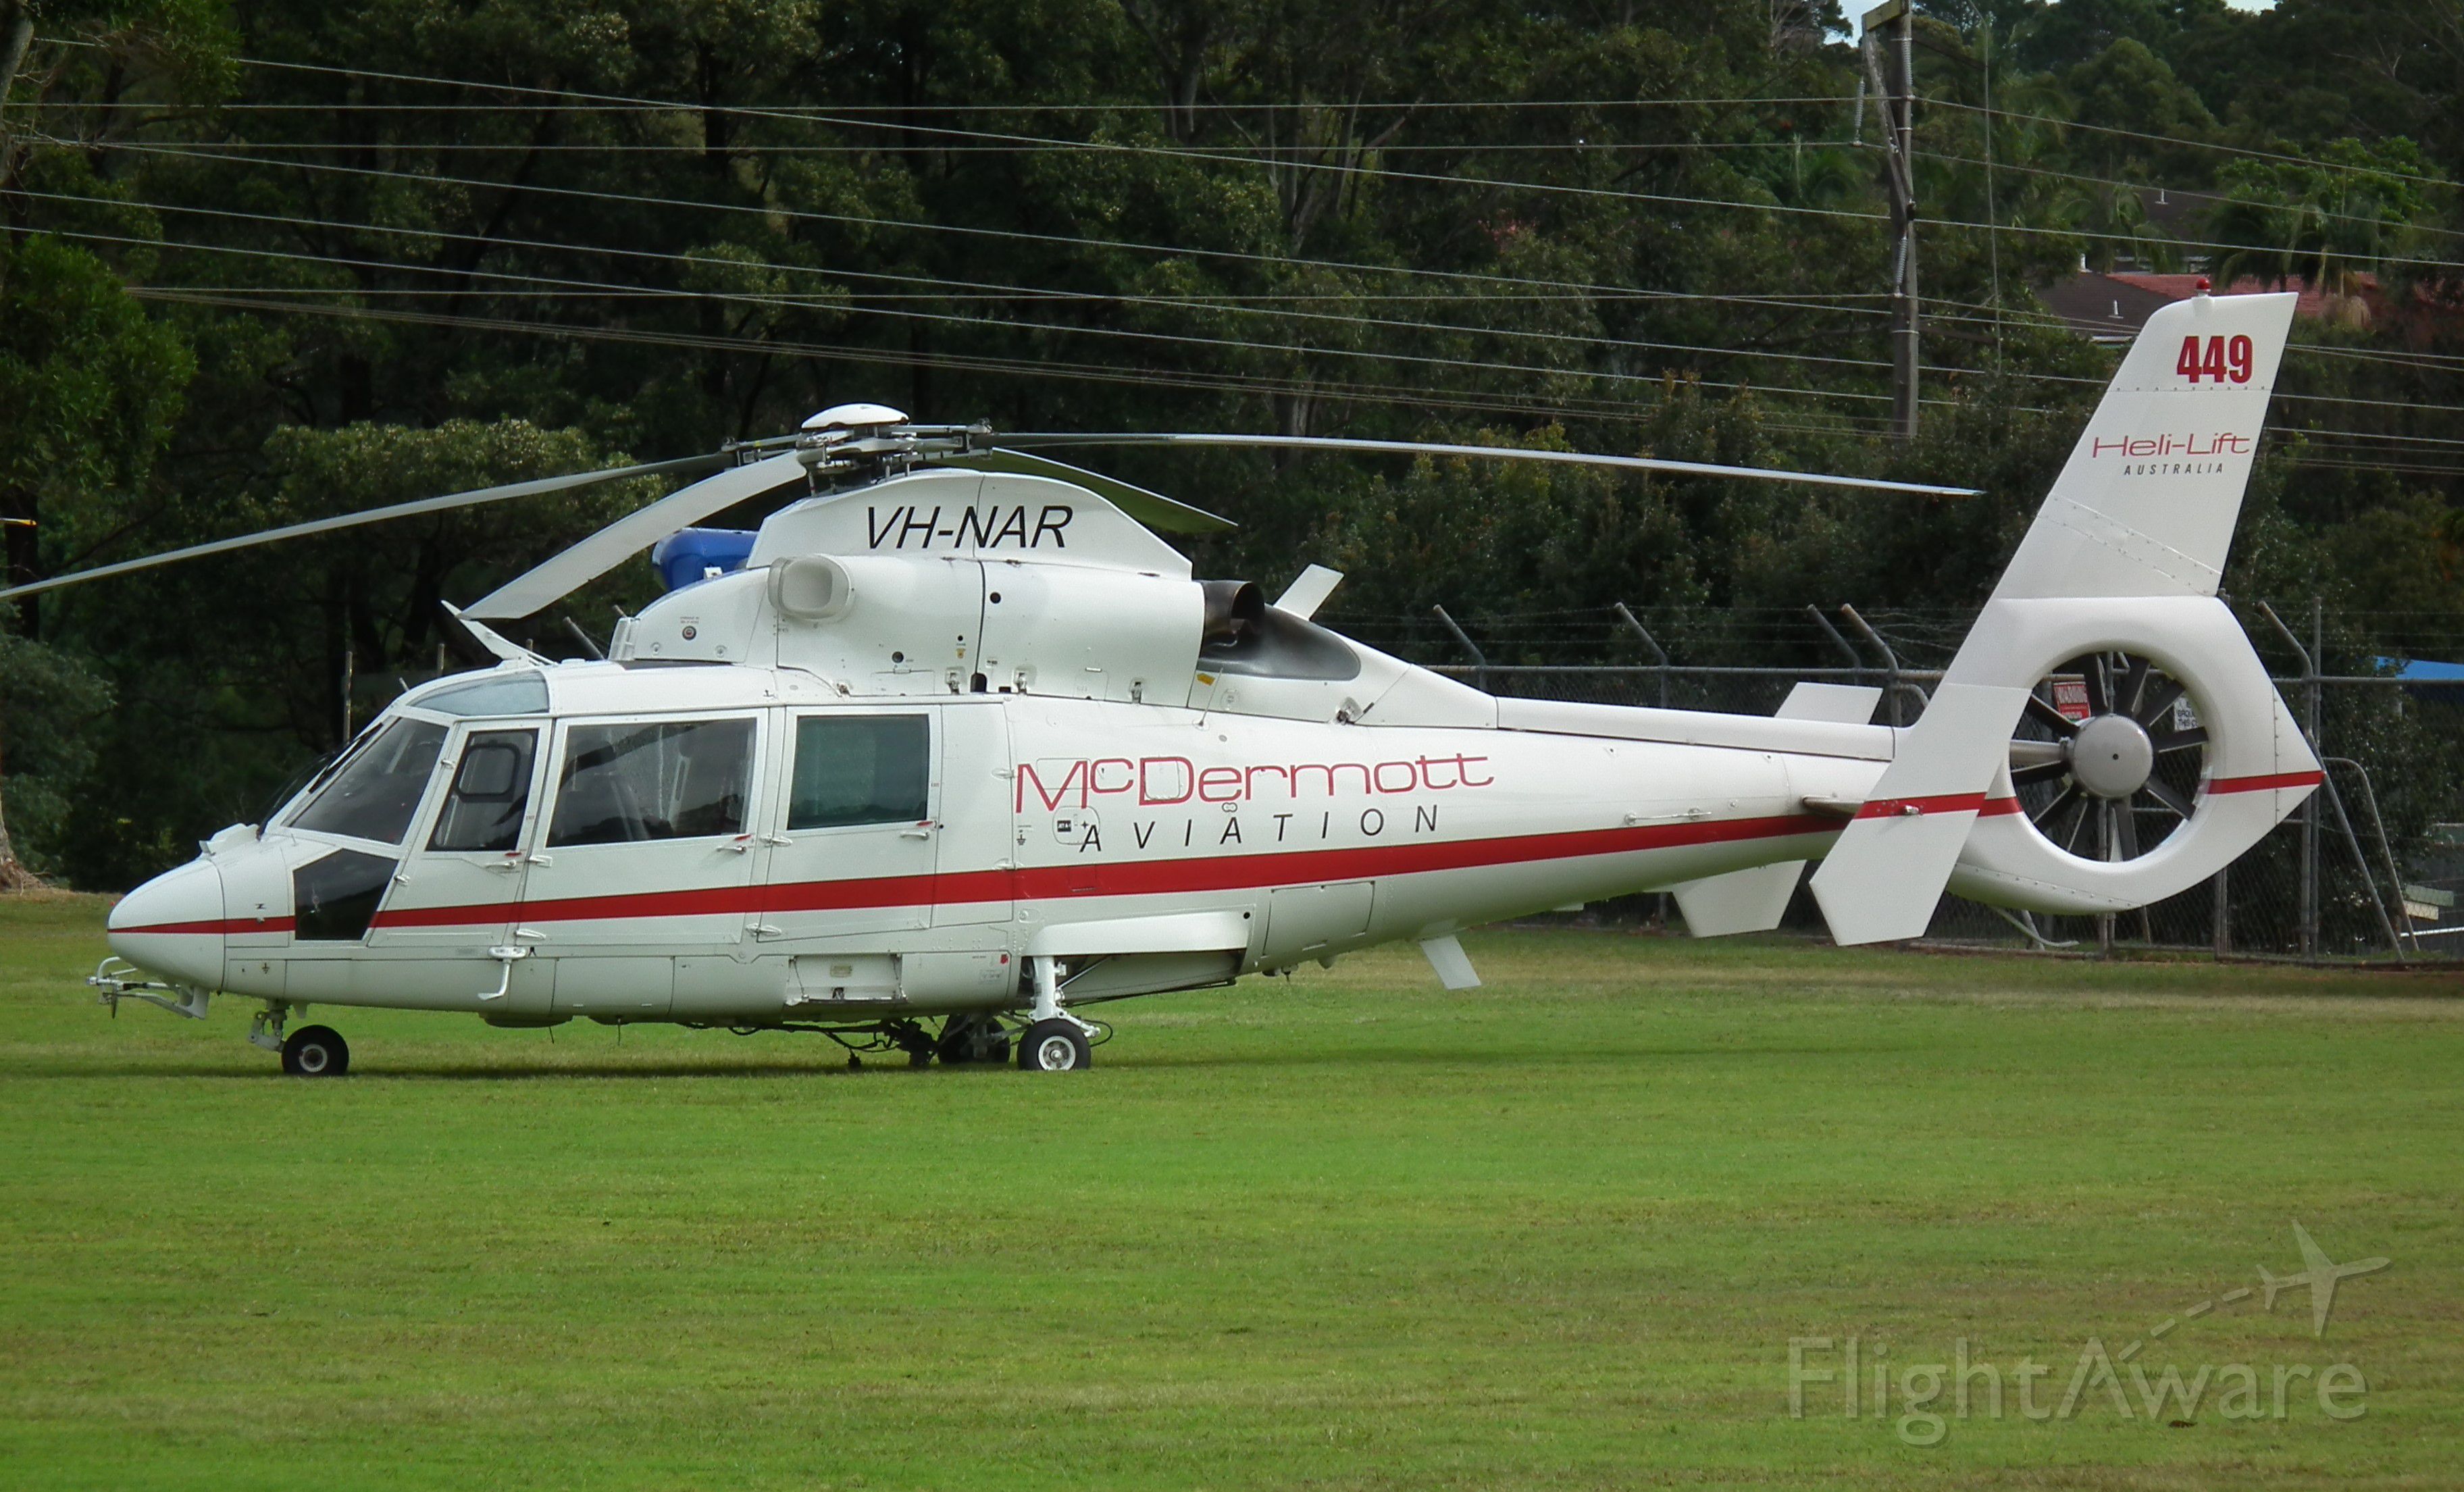 — — - Eurocopter AS - 365 VH - NAR at goonellabah (lismore) for flood relief